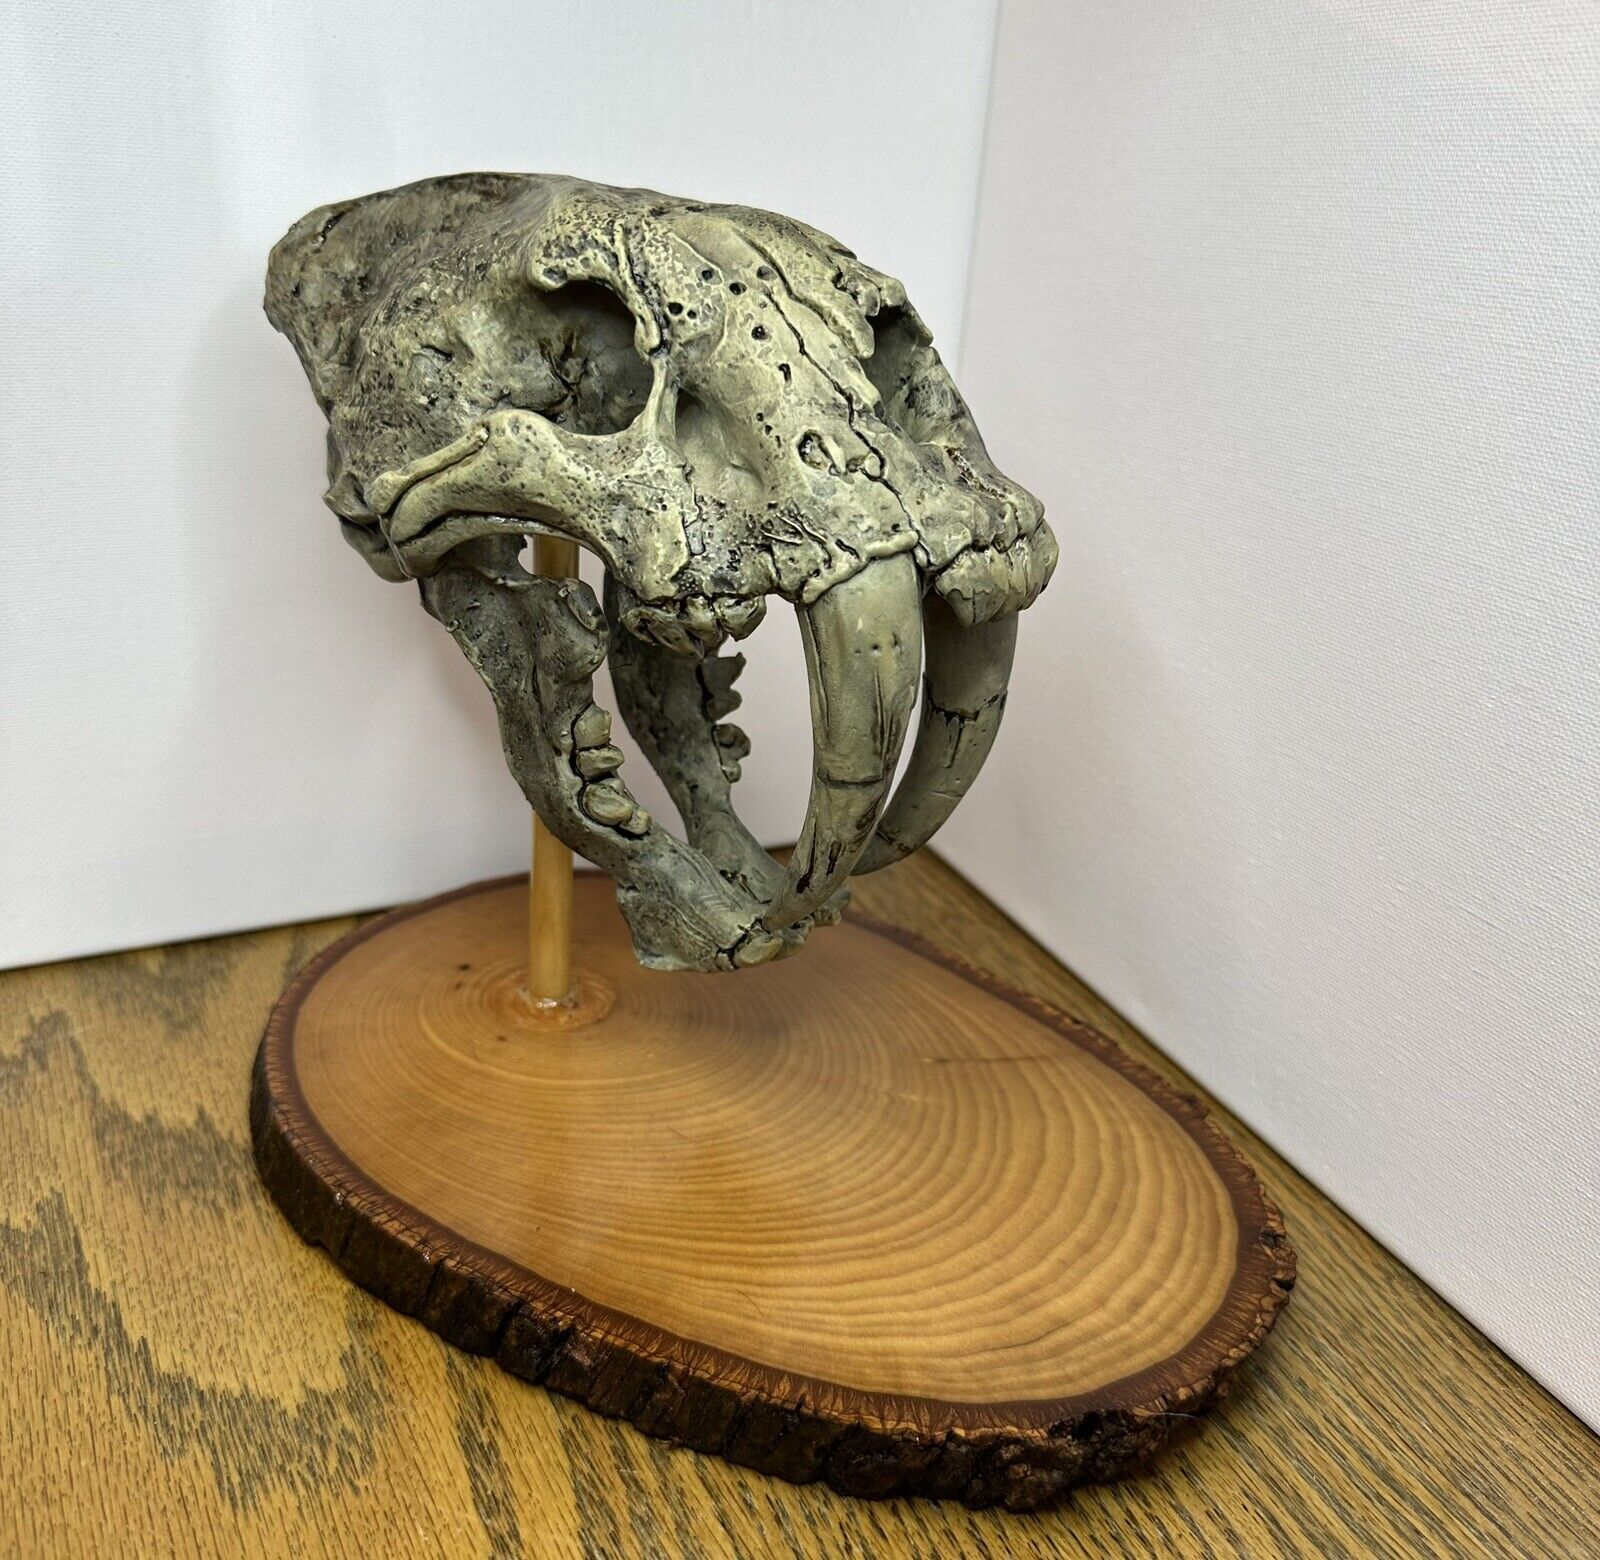 Sabertooth Tiger Skull-3d Printed With Hand Made Wood Base (Open To Offers)